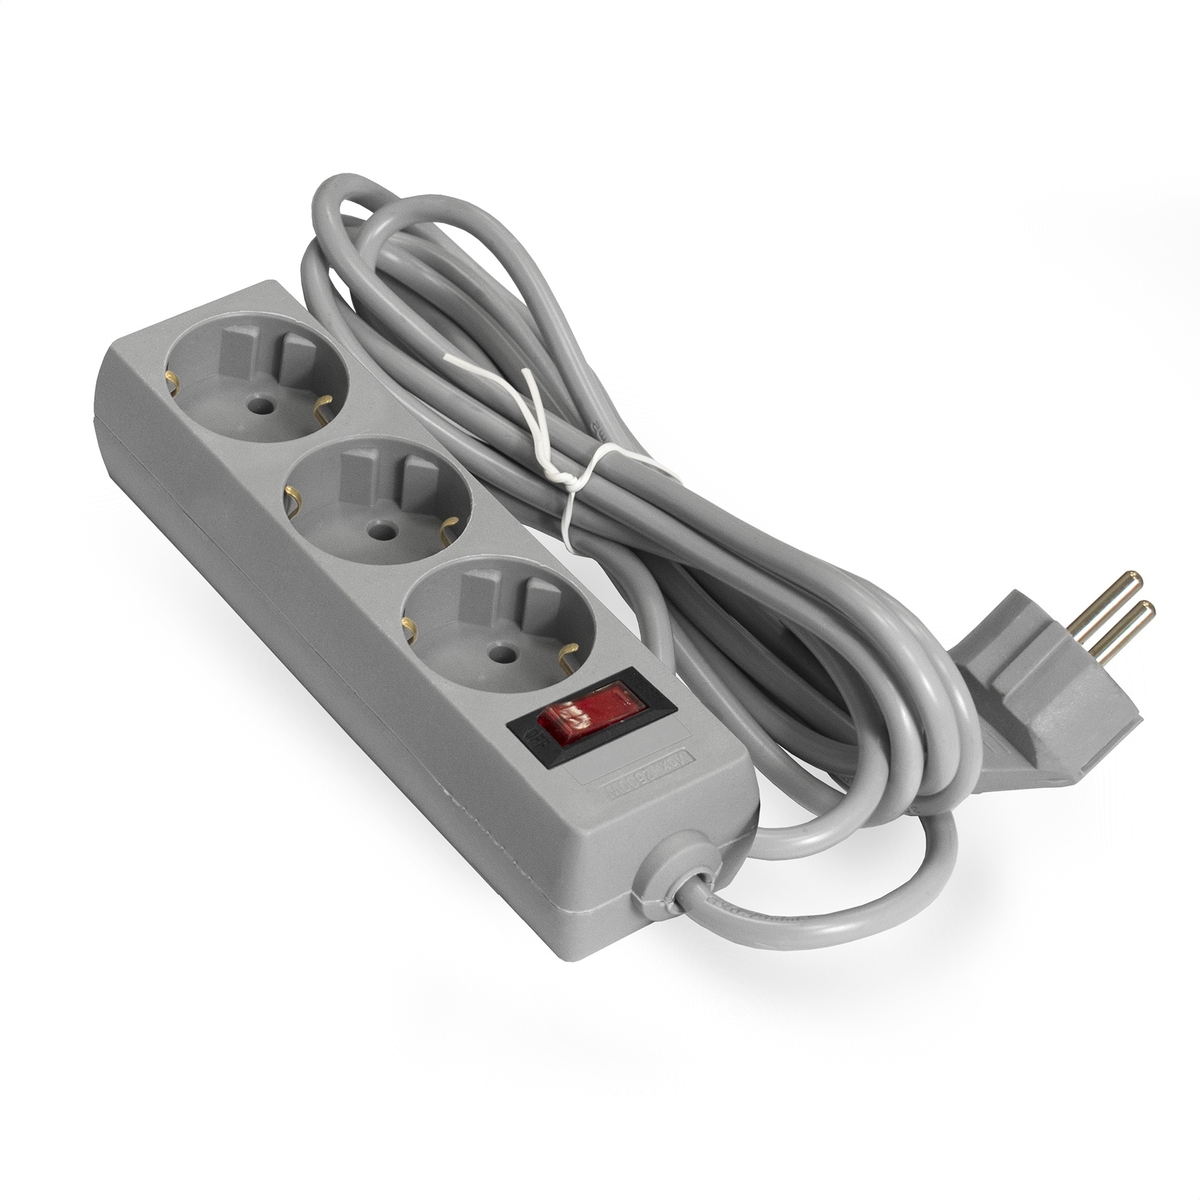 Surge protector ExeGate SP-3-3G